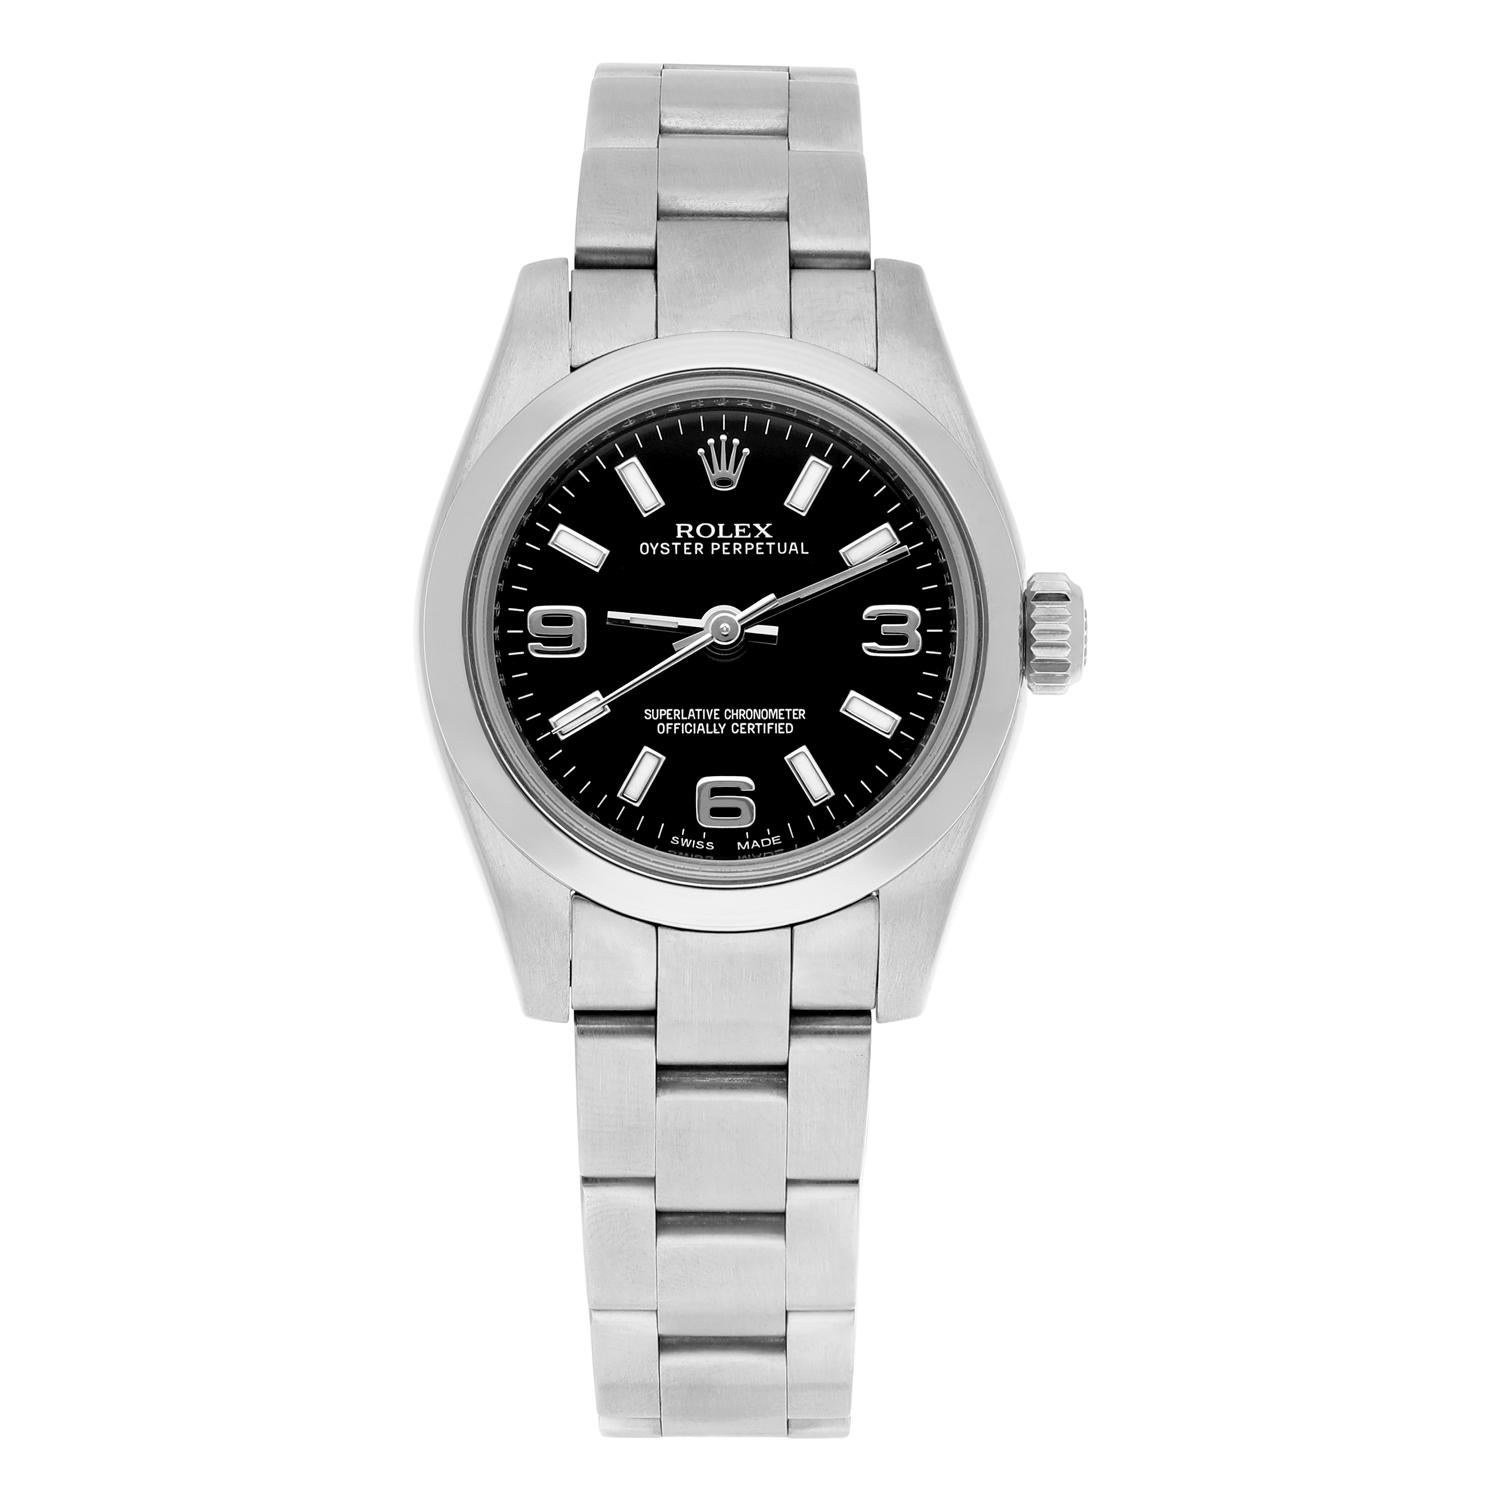 This elegant Rolex Lady wristwatch is a timeless piece of luxury that will be cherished for years to come. The bezel is a sleek silver color and the dial features square indexes and Arabic numerals. Watch has been professionally polished, serviced